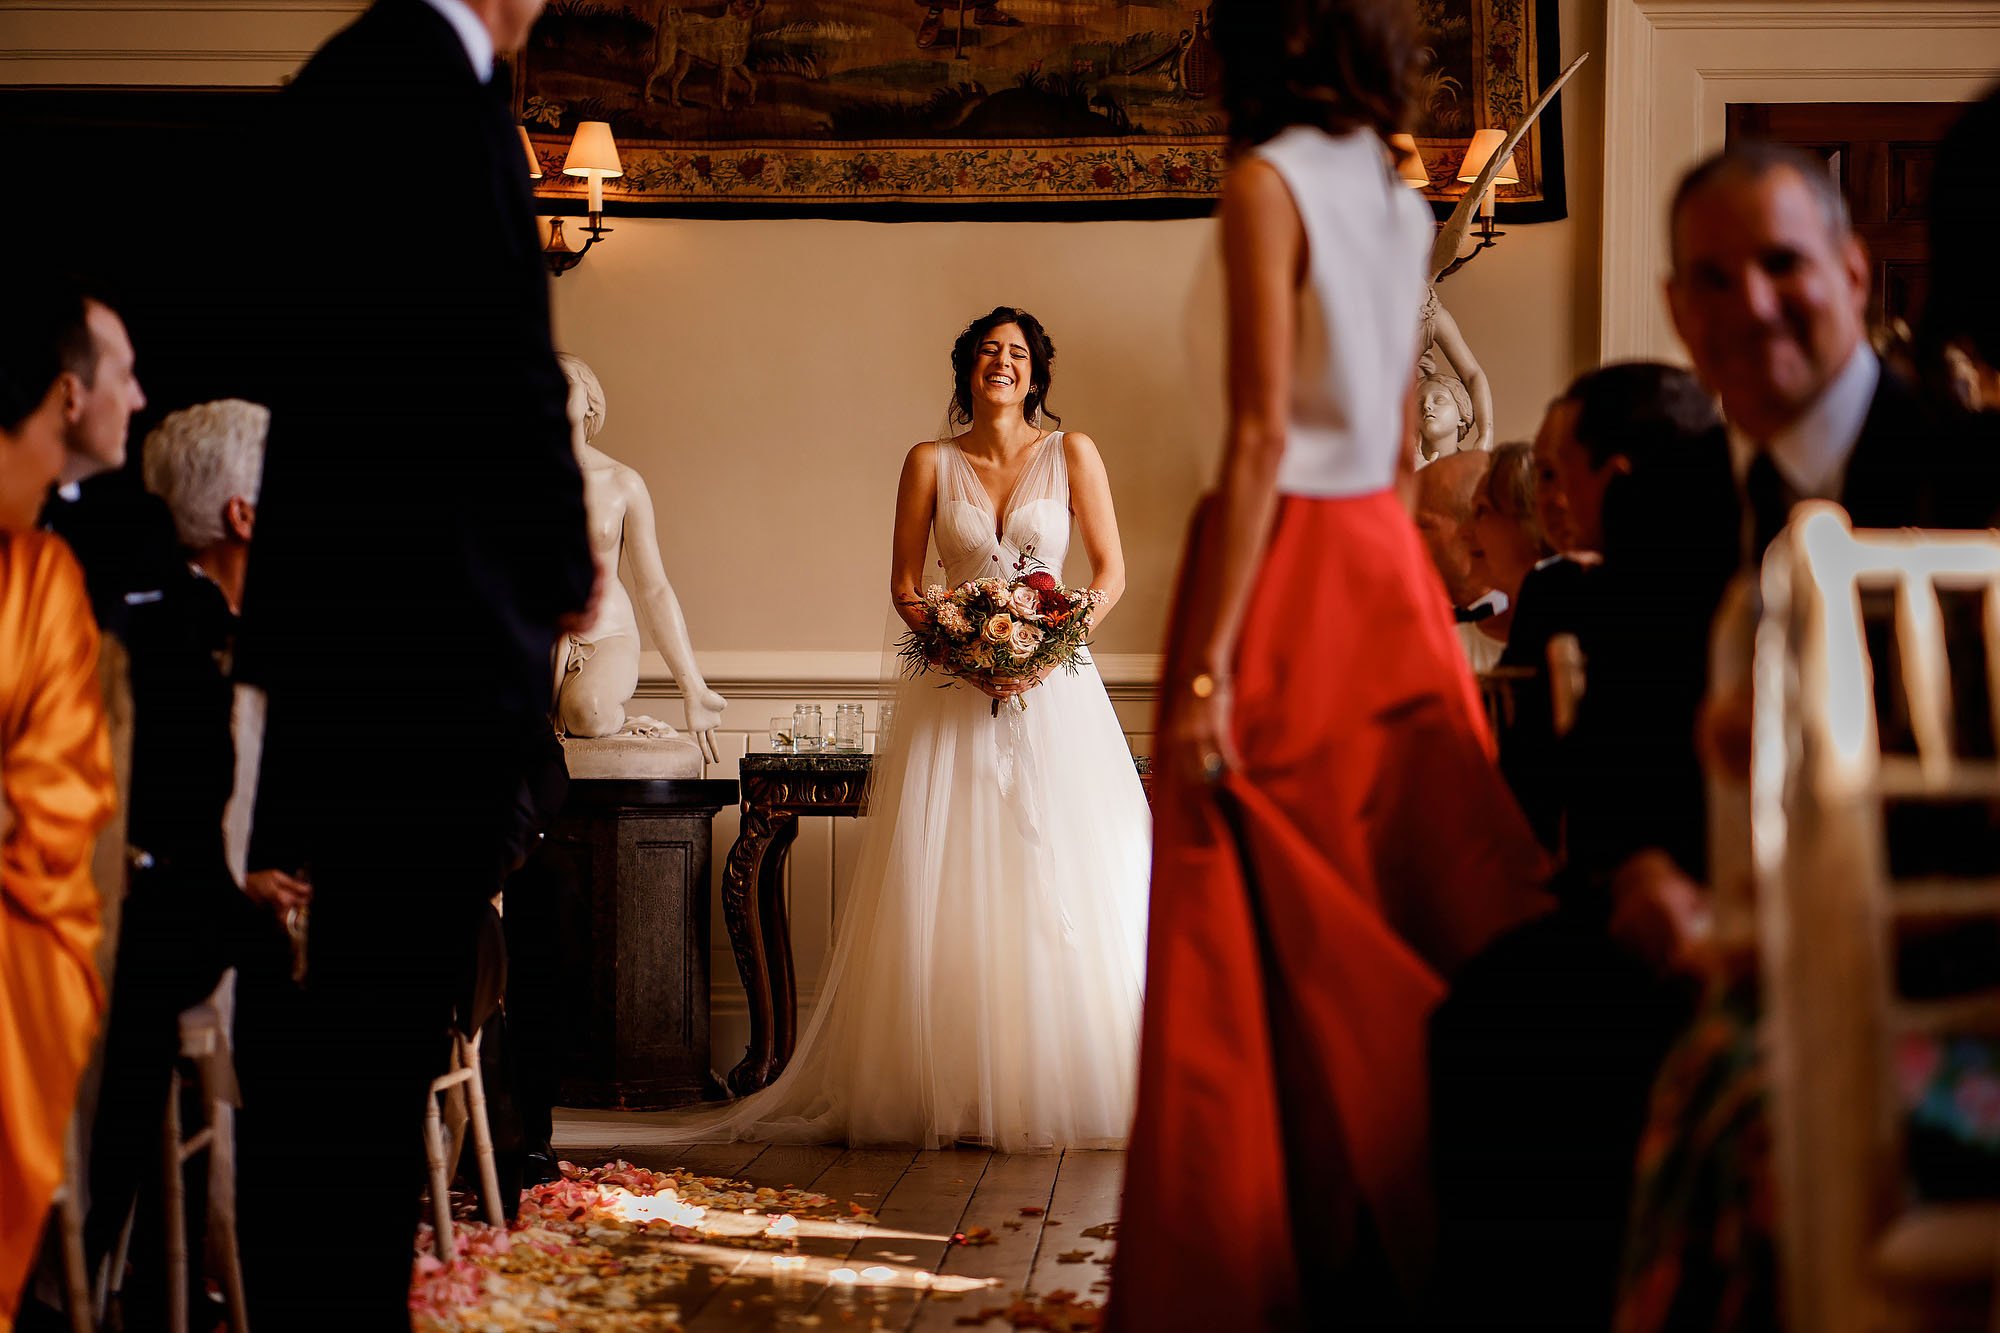 Cotswolds weddings at elmore court